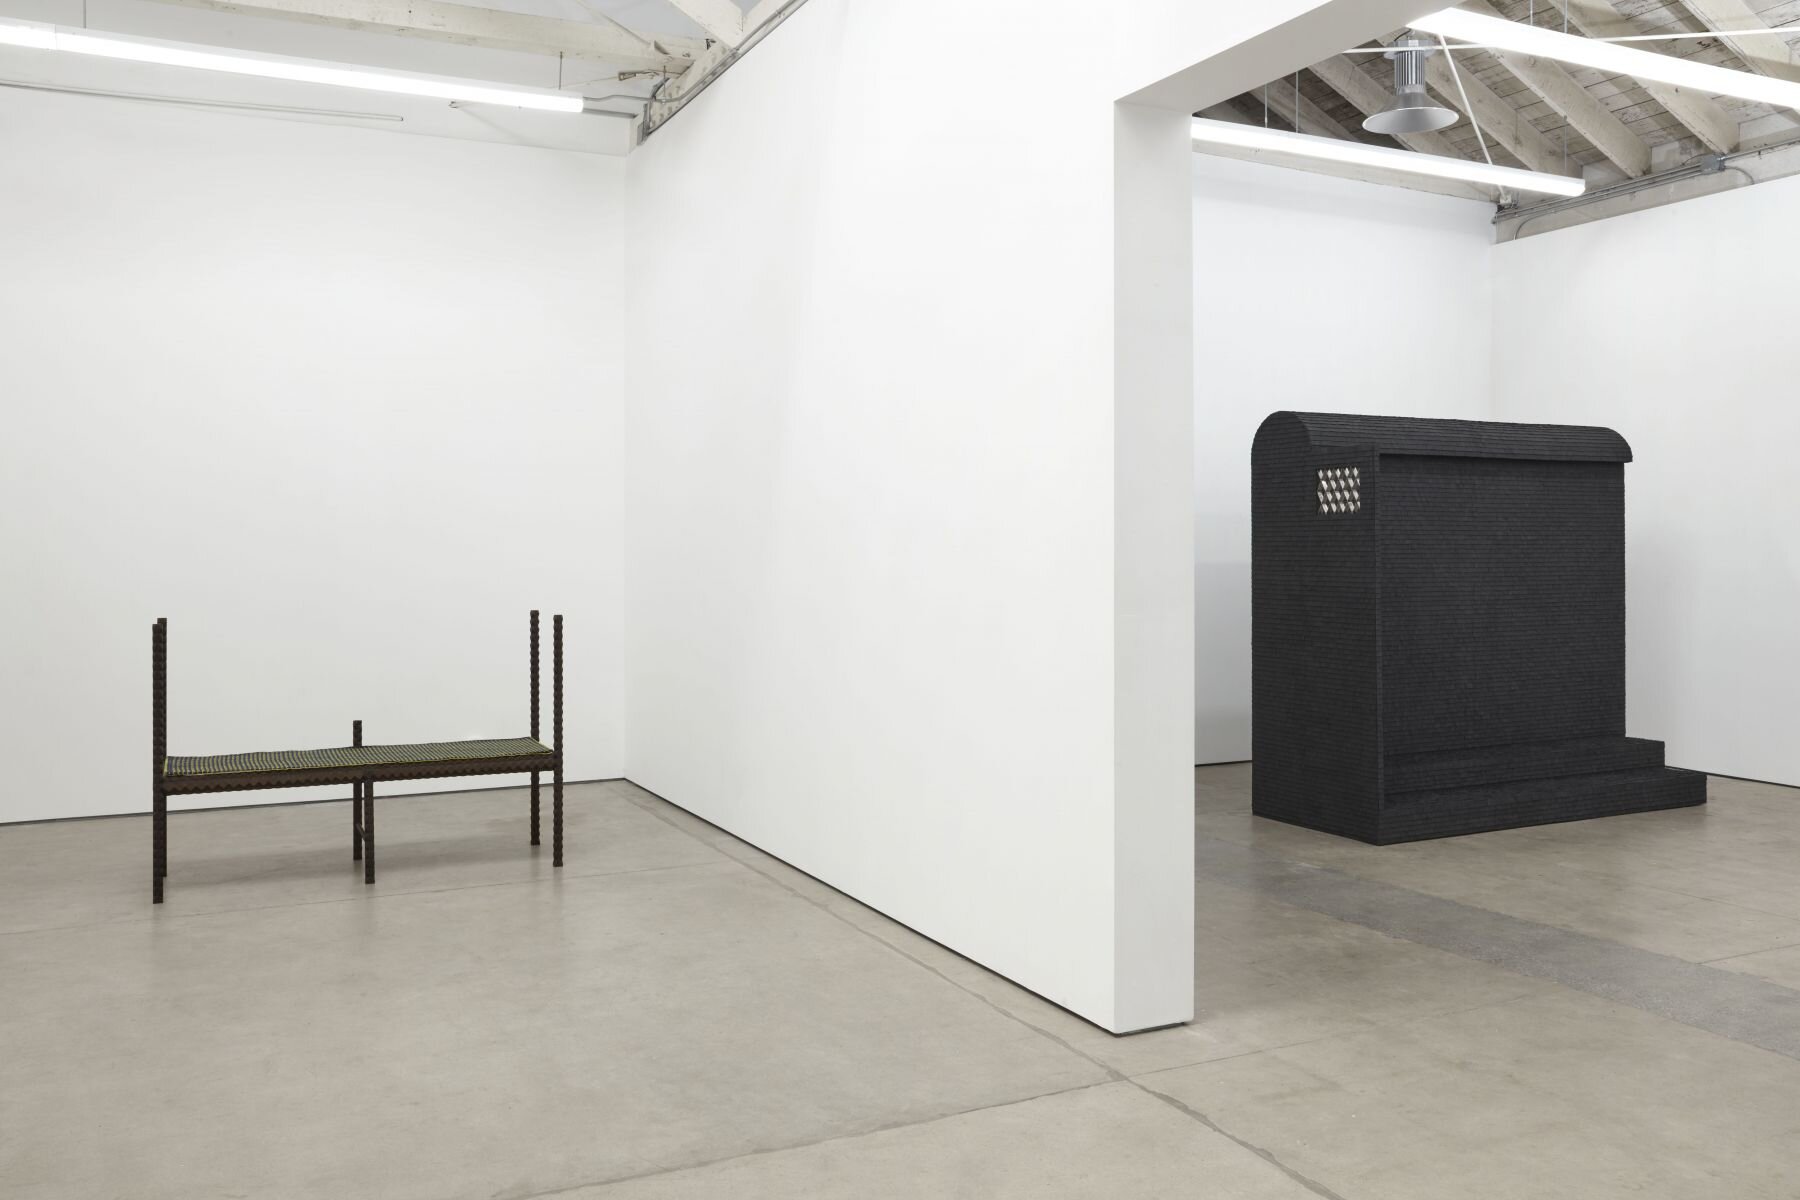 installation view, "Fine As All Outdoors" at Matthew Brown Gallery